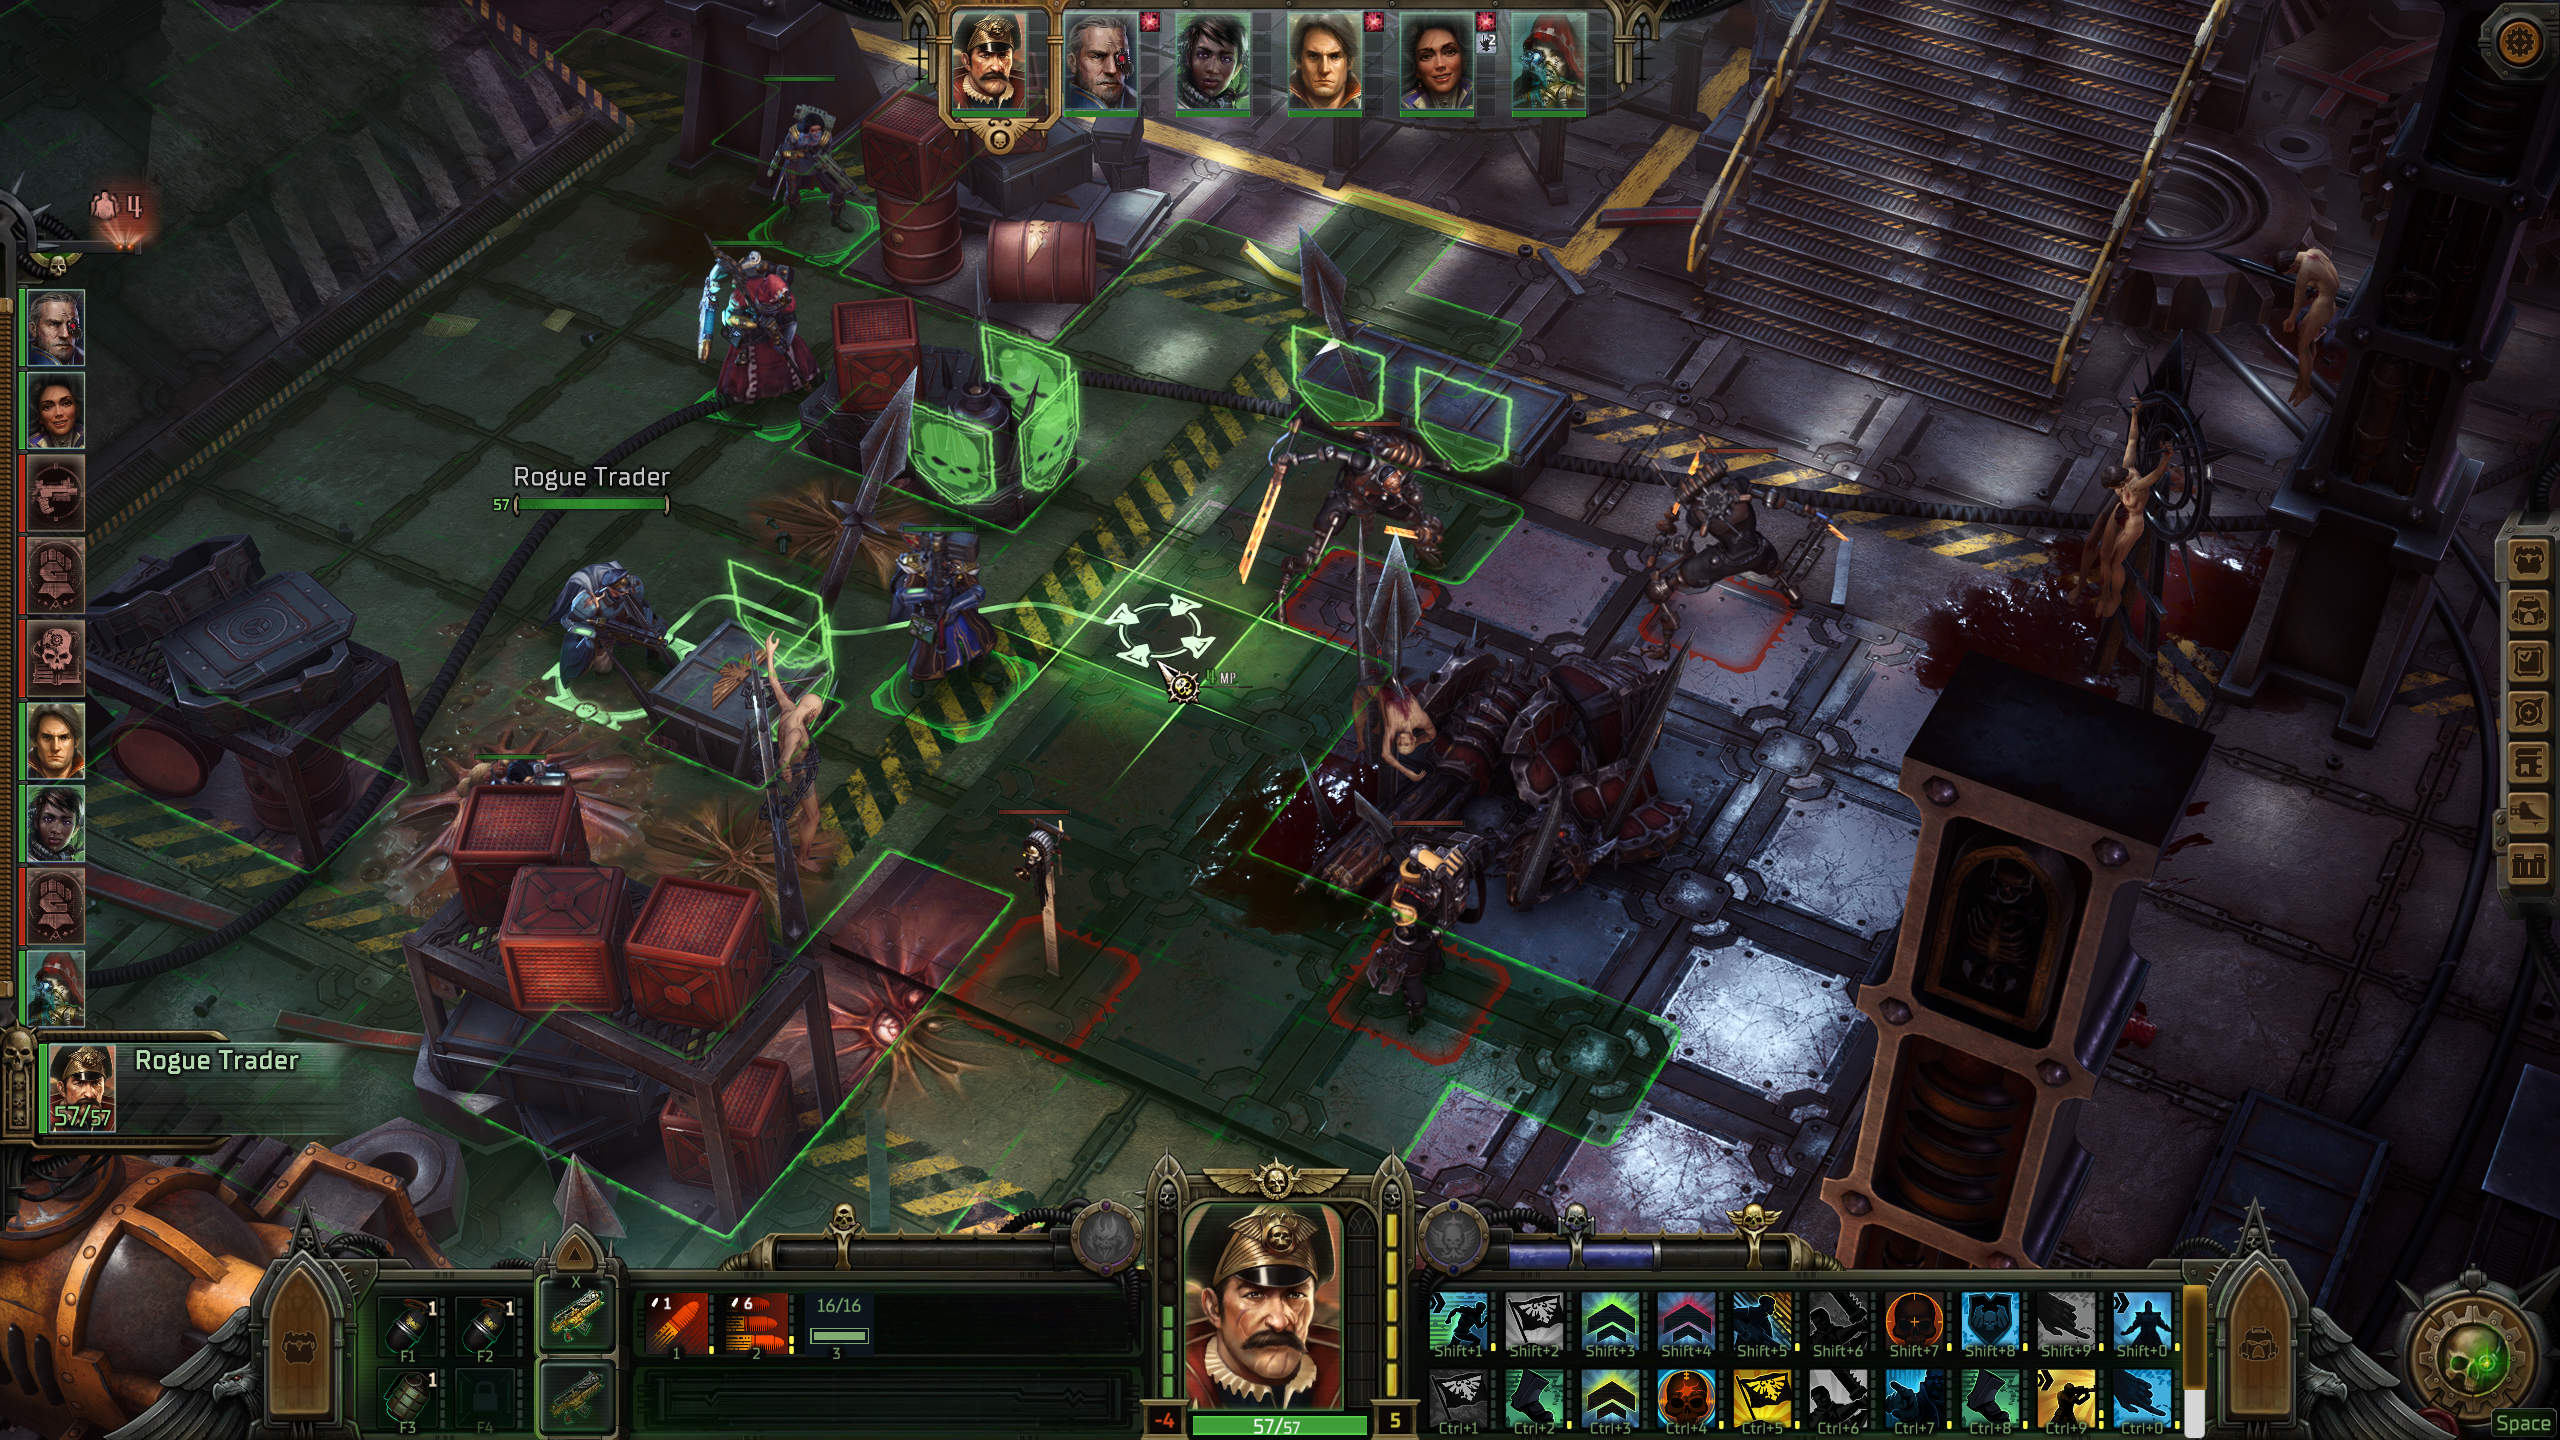 A screenshot from Warhammer 40,000: Rogue Trader. The player character enters combat on a turn-based tactical grid.